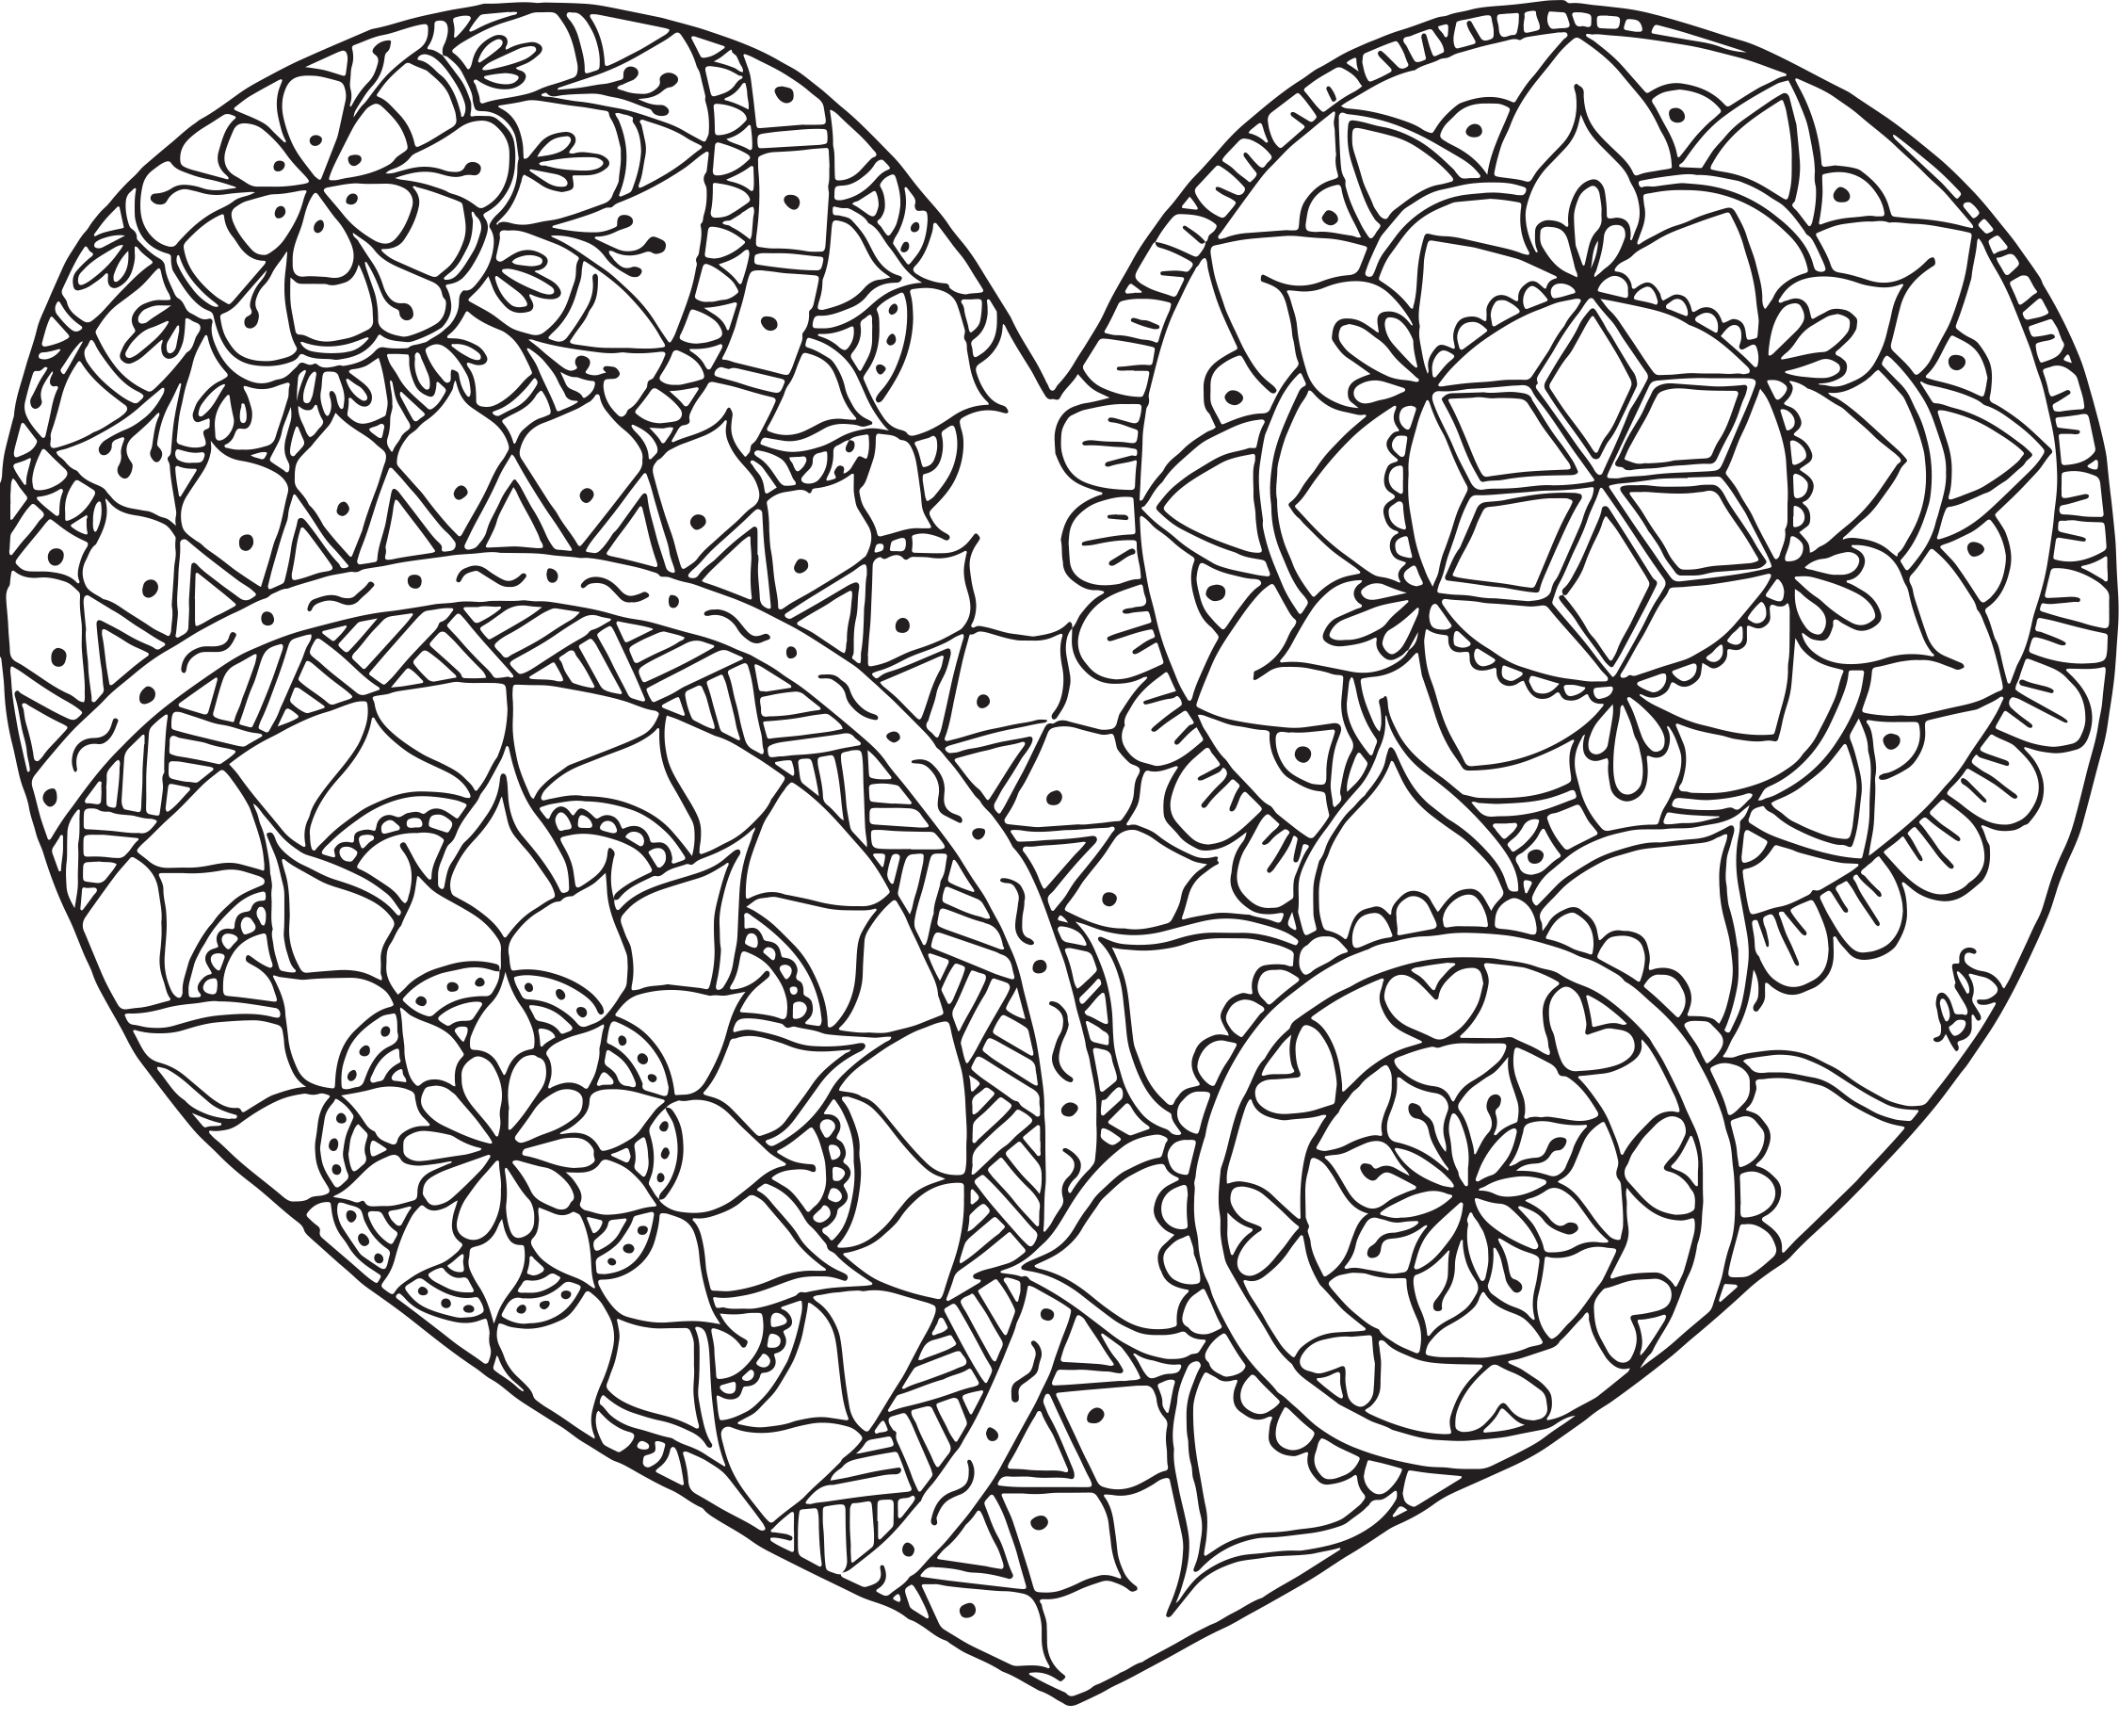 Free downloadable coloring page